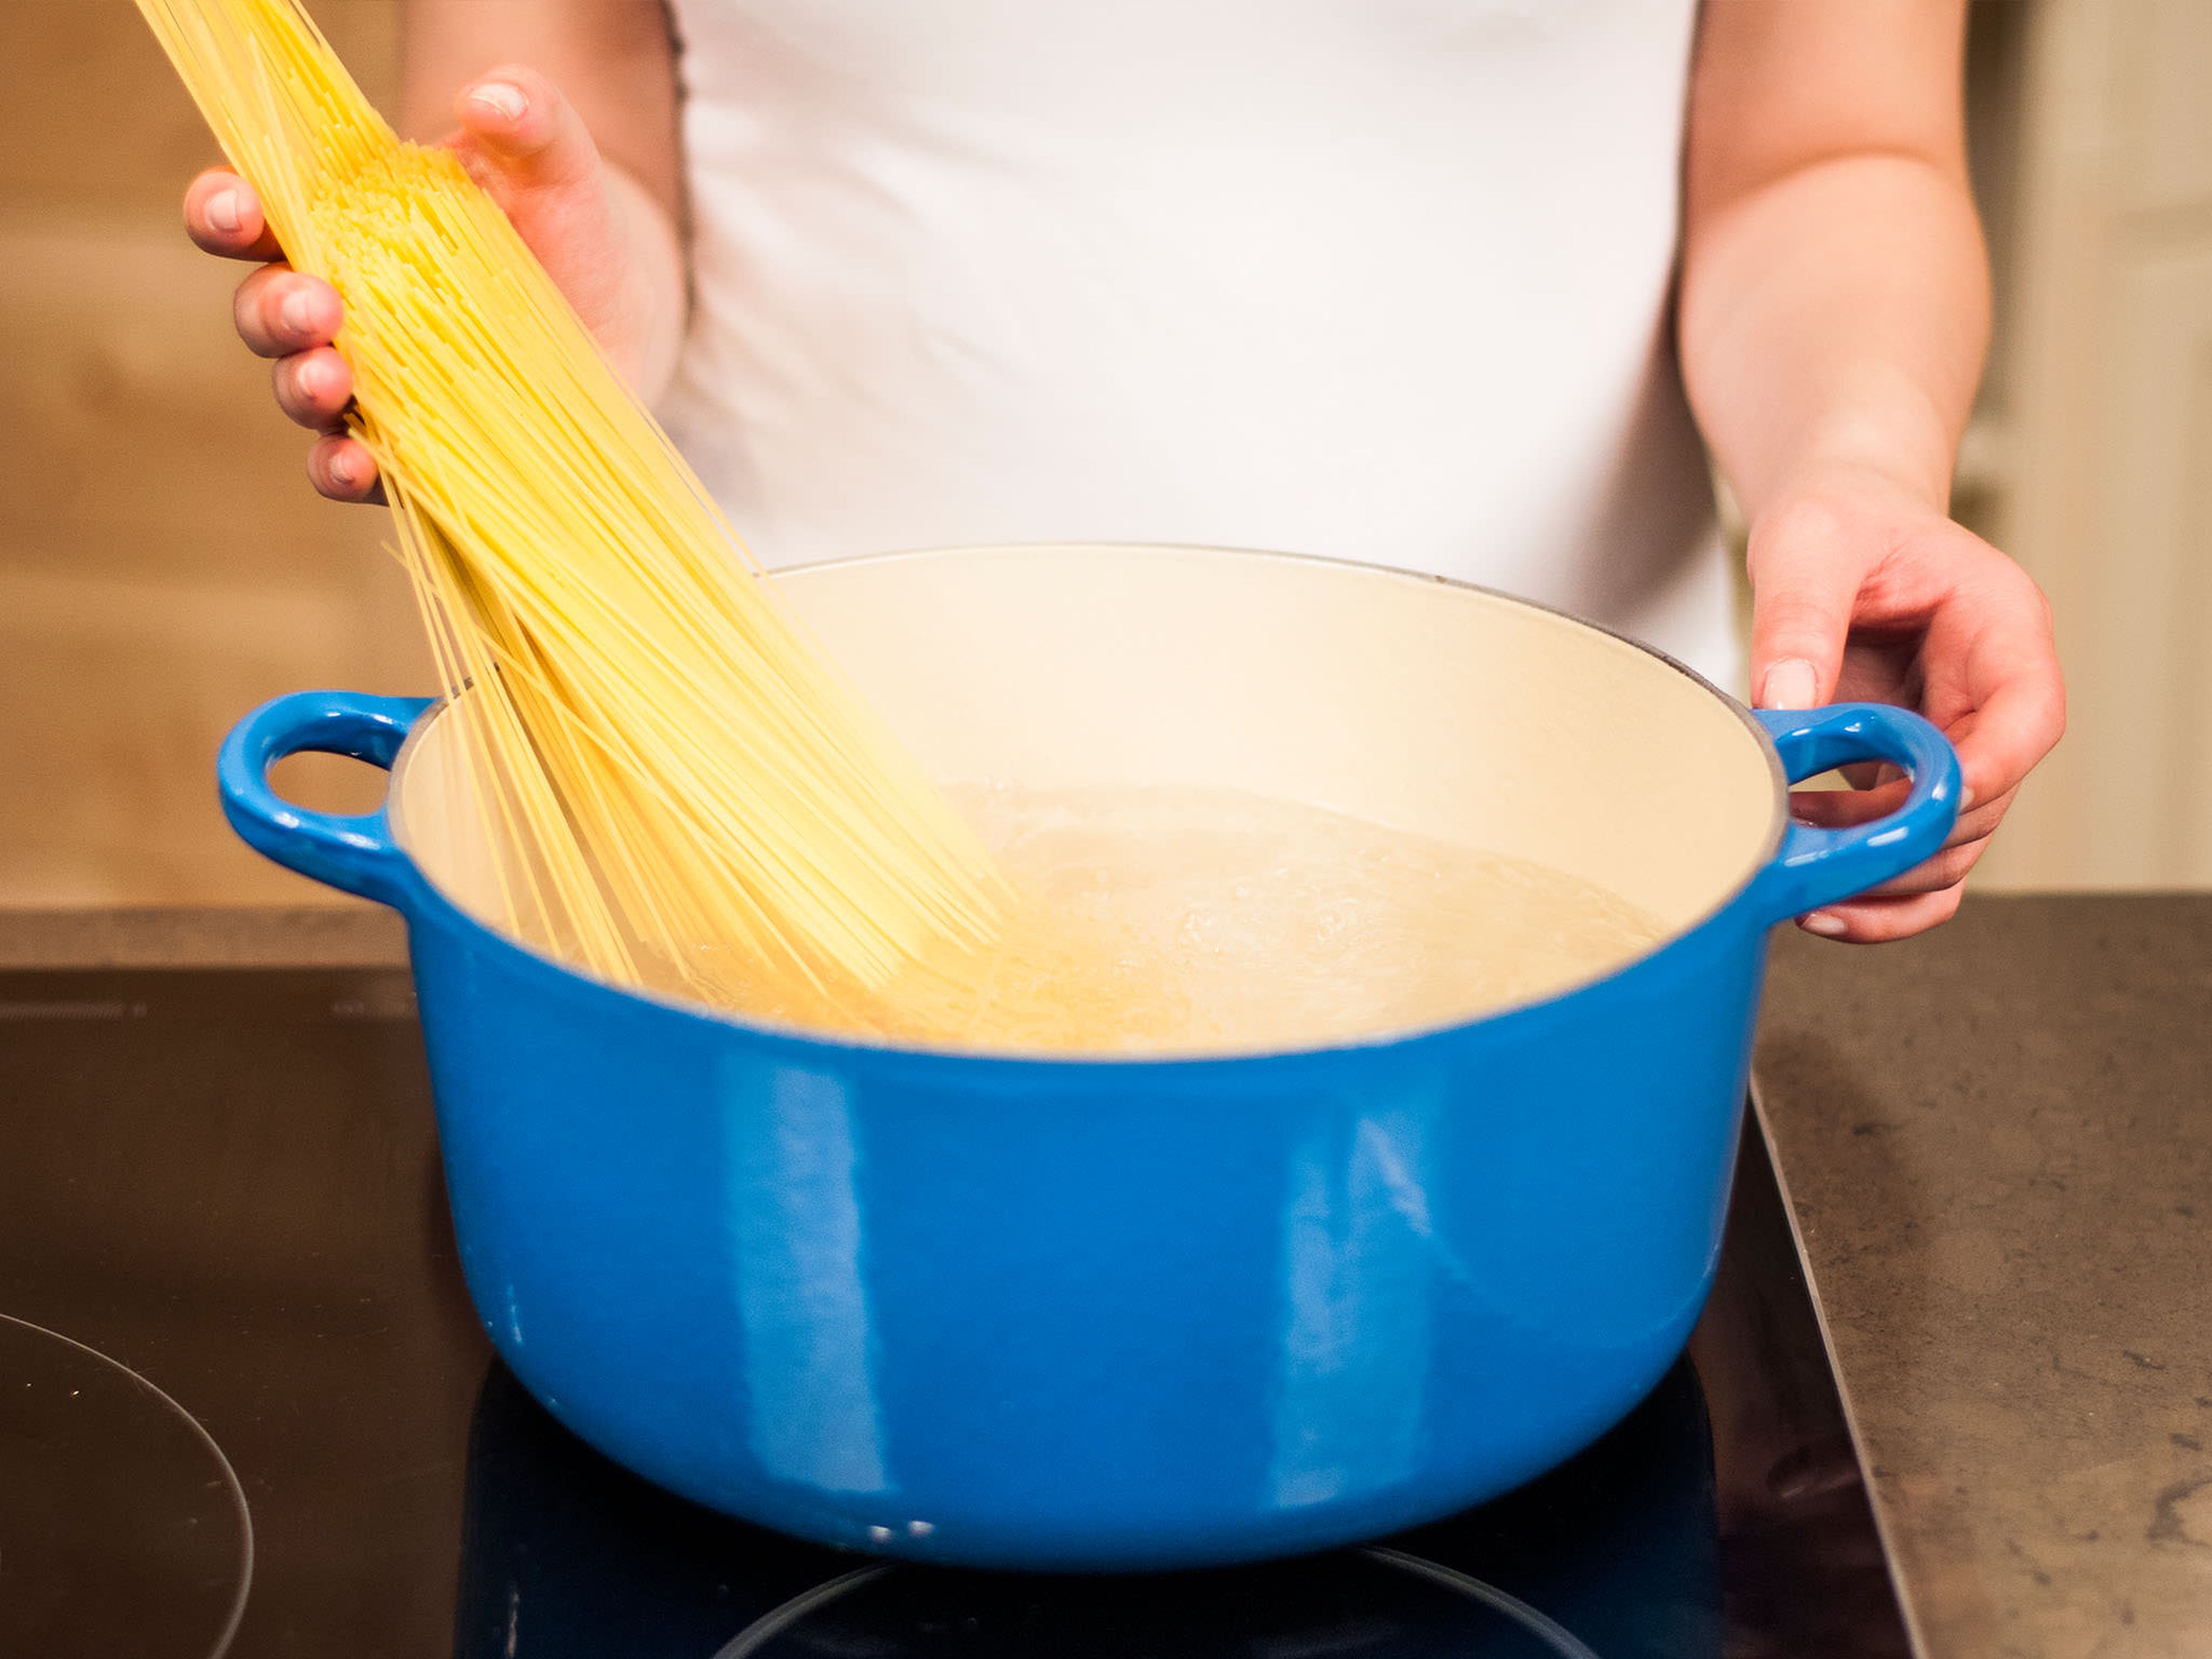 Cook pasta in plenty of salted boiling water, according to package instructions, for approx. 5 – 7 min. until al dente. Drain, save some pasta water and set aside.